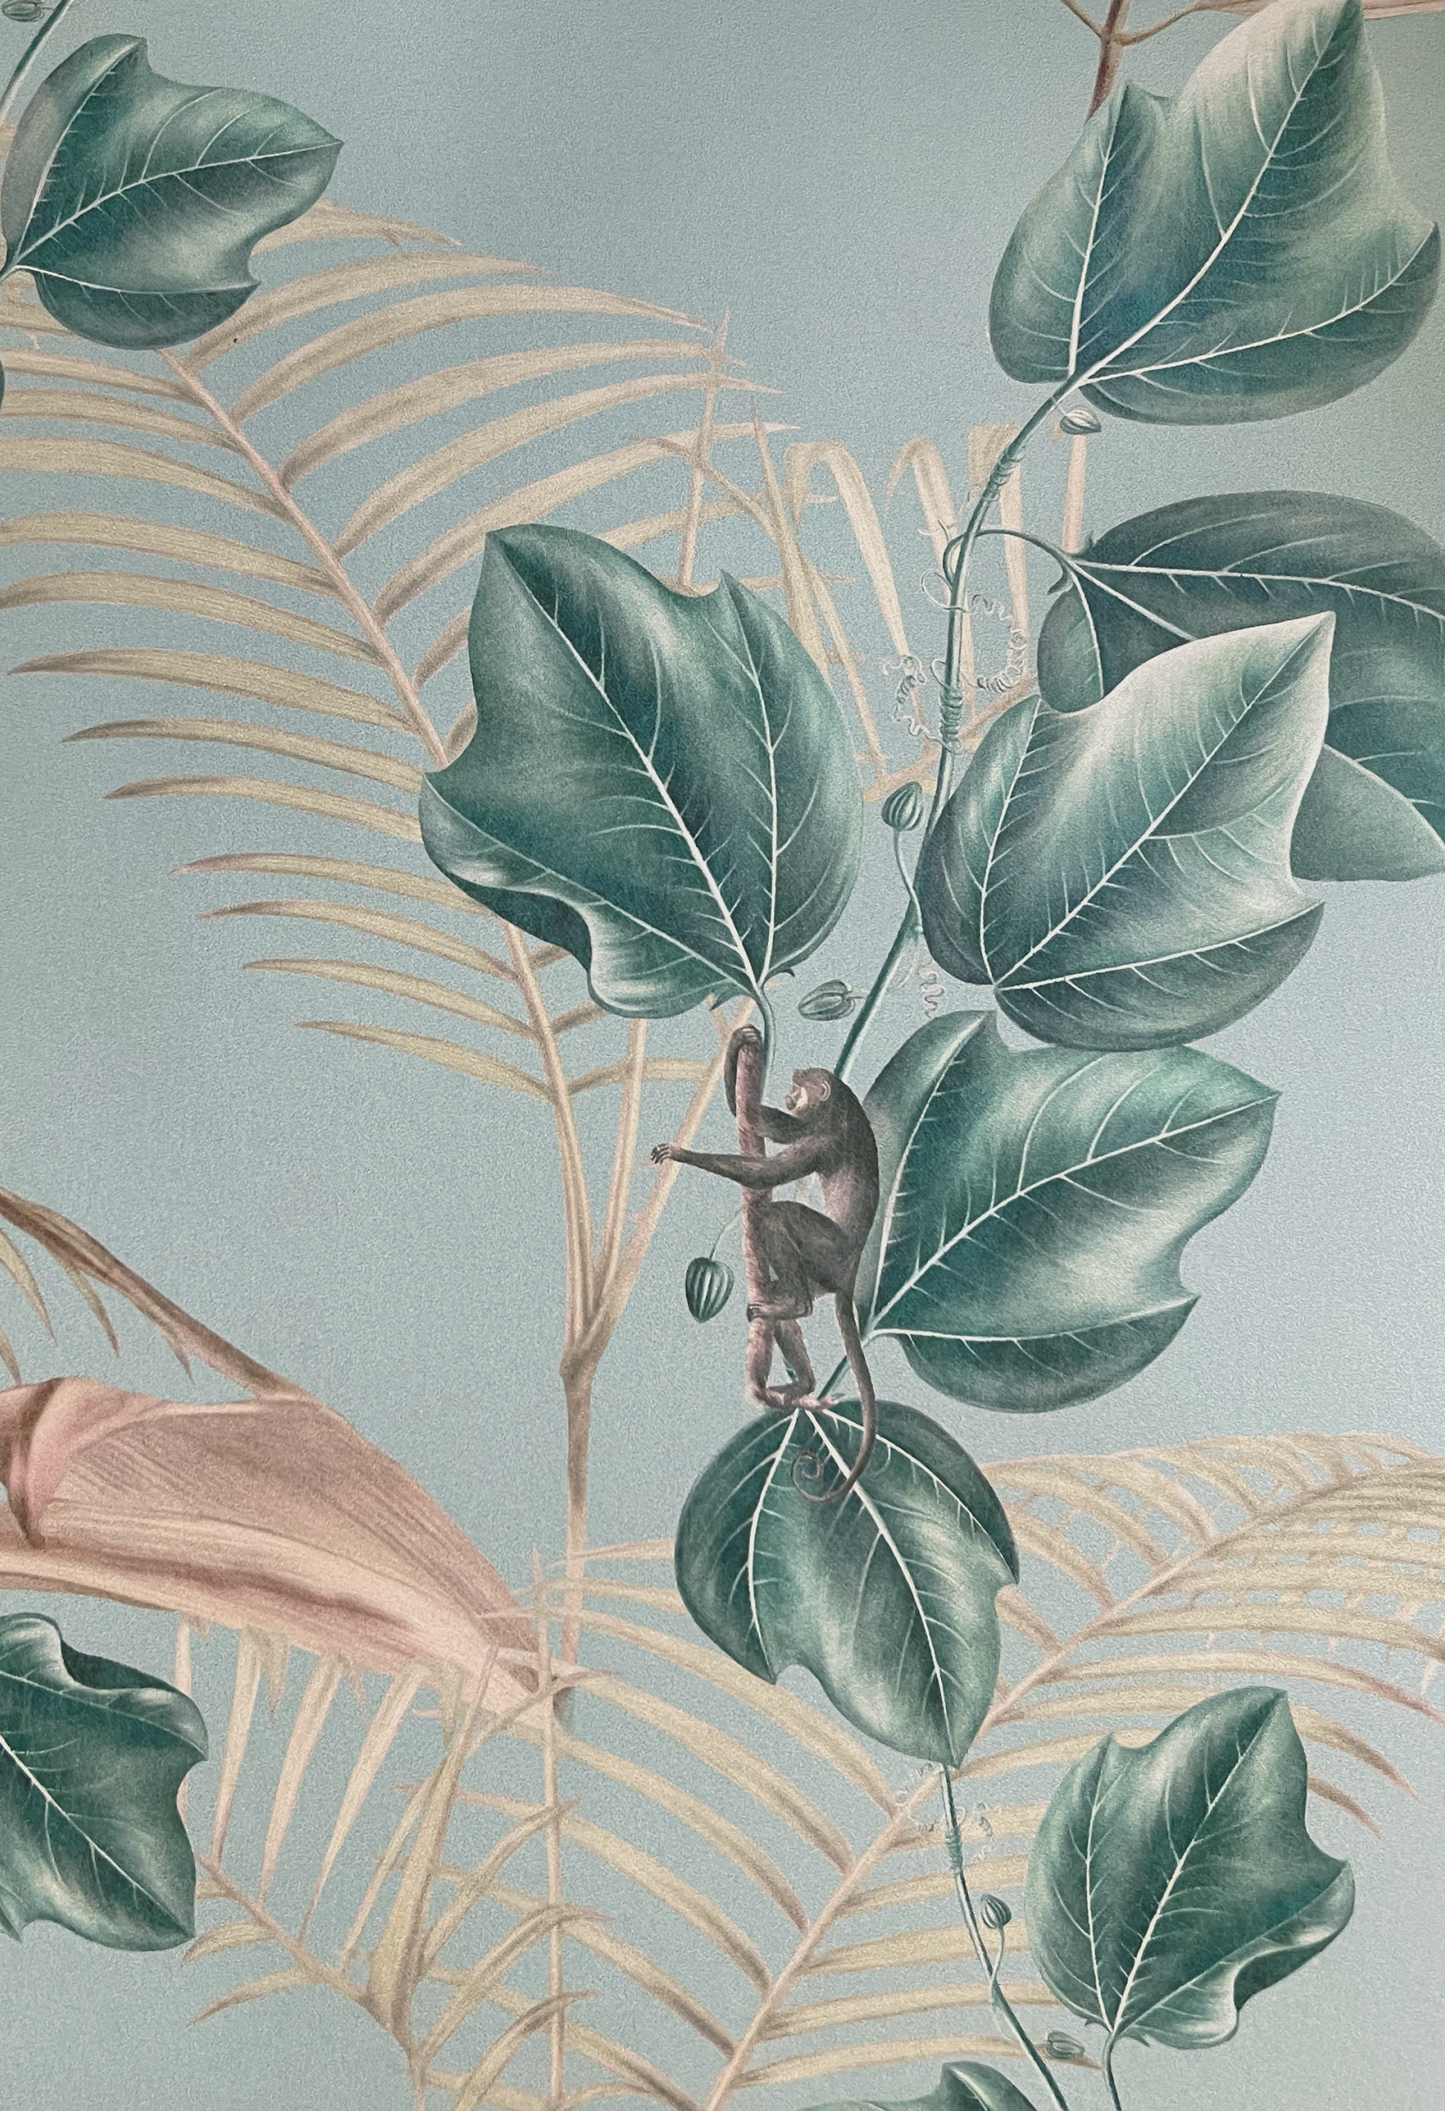 Little spider monkey climbing branch of a leafy canopy surrounded by palms on blue background by Deus Ex Gardenia of Wild Ivy wallpaper in Horizon.